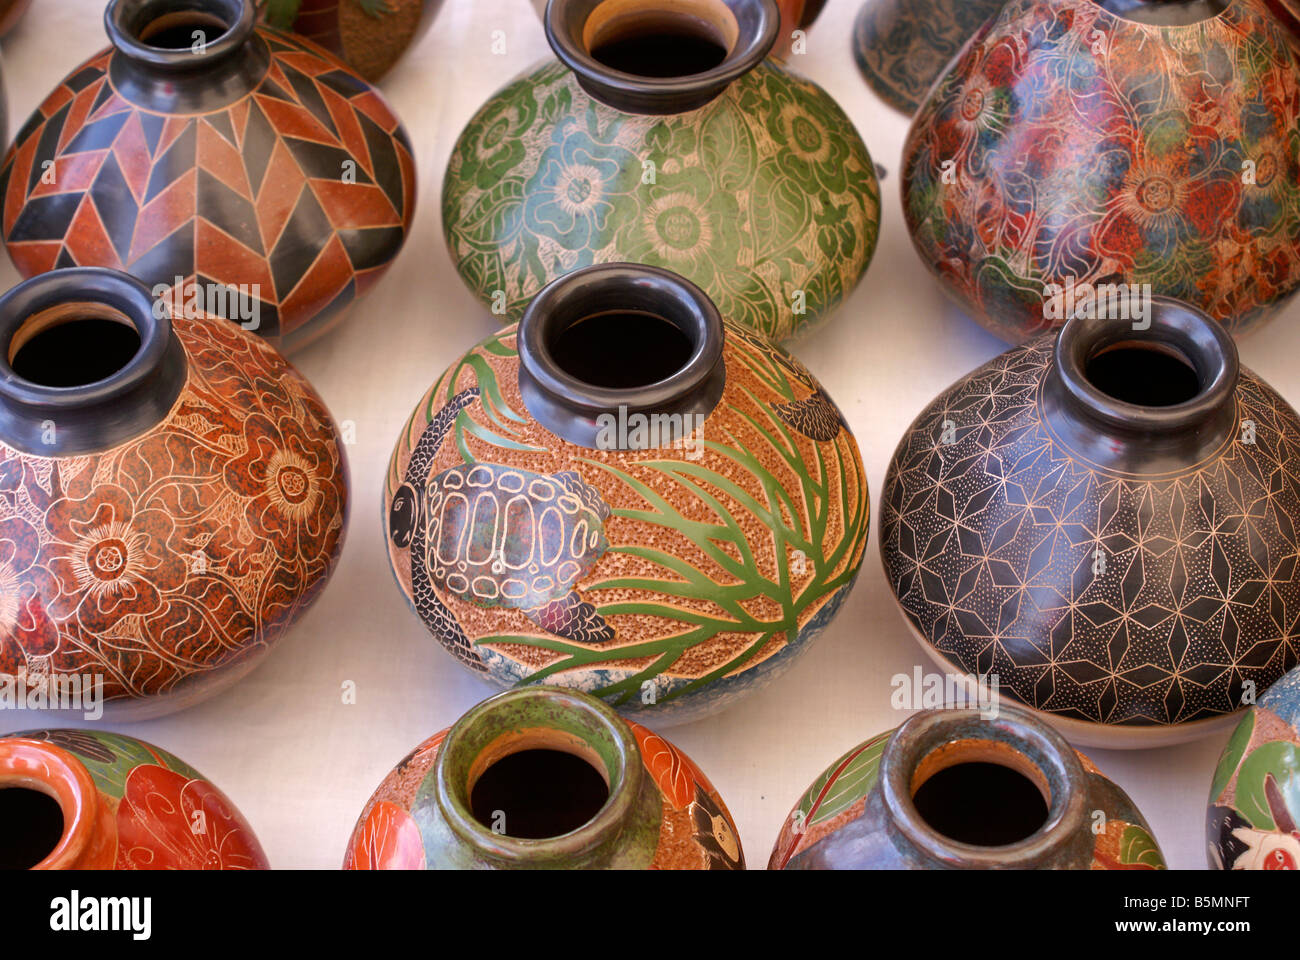 Pottery from San Juan de Oriente in the Pueblos Blancos or White Towns, Nicaragua Stock Photo